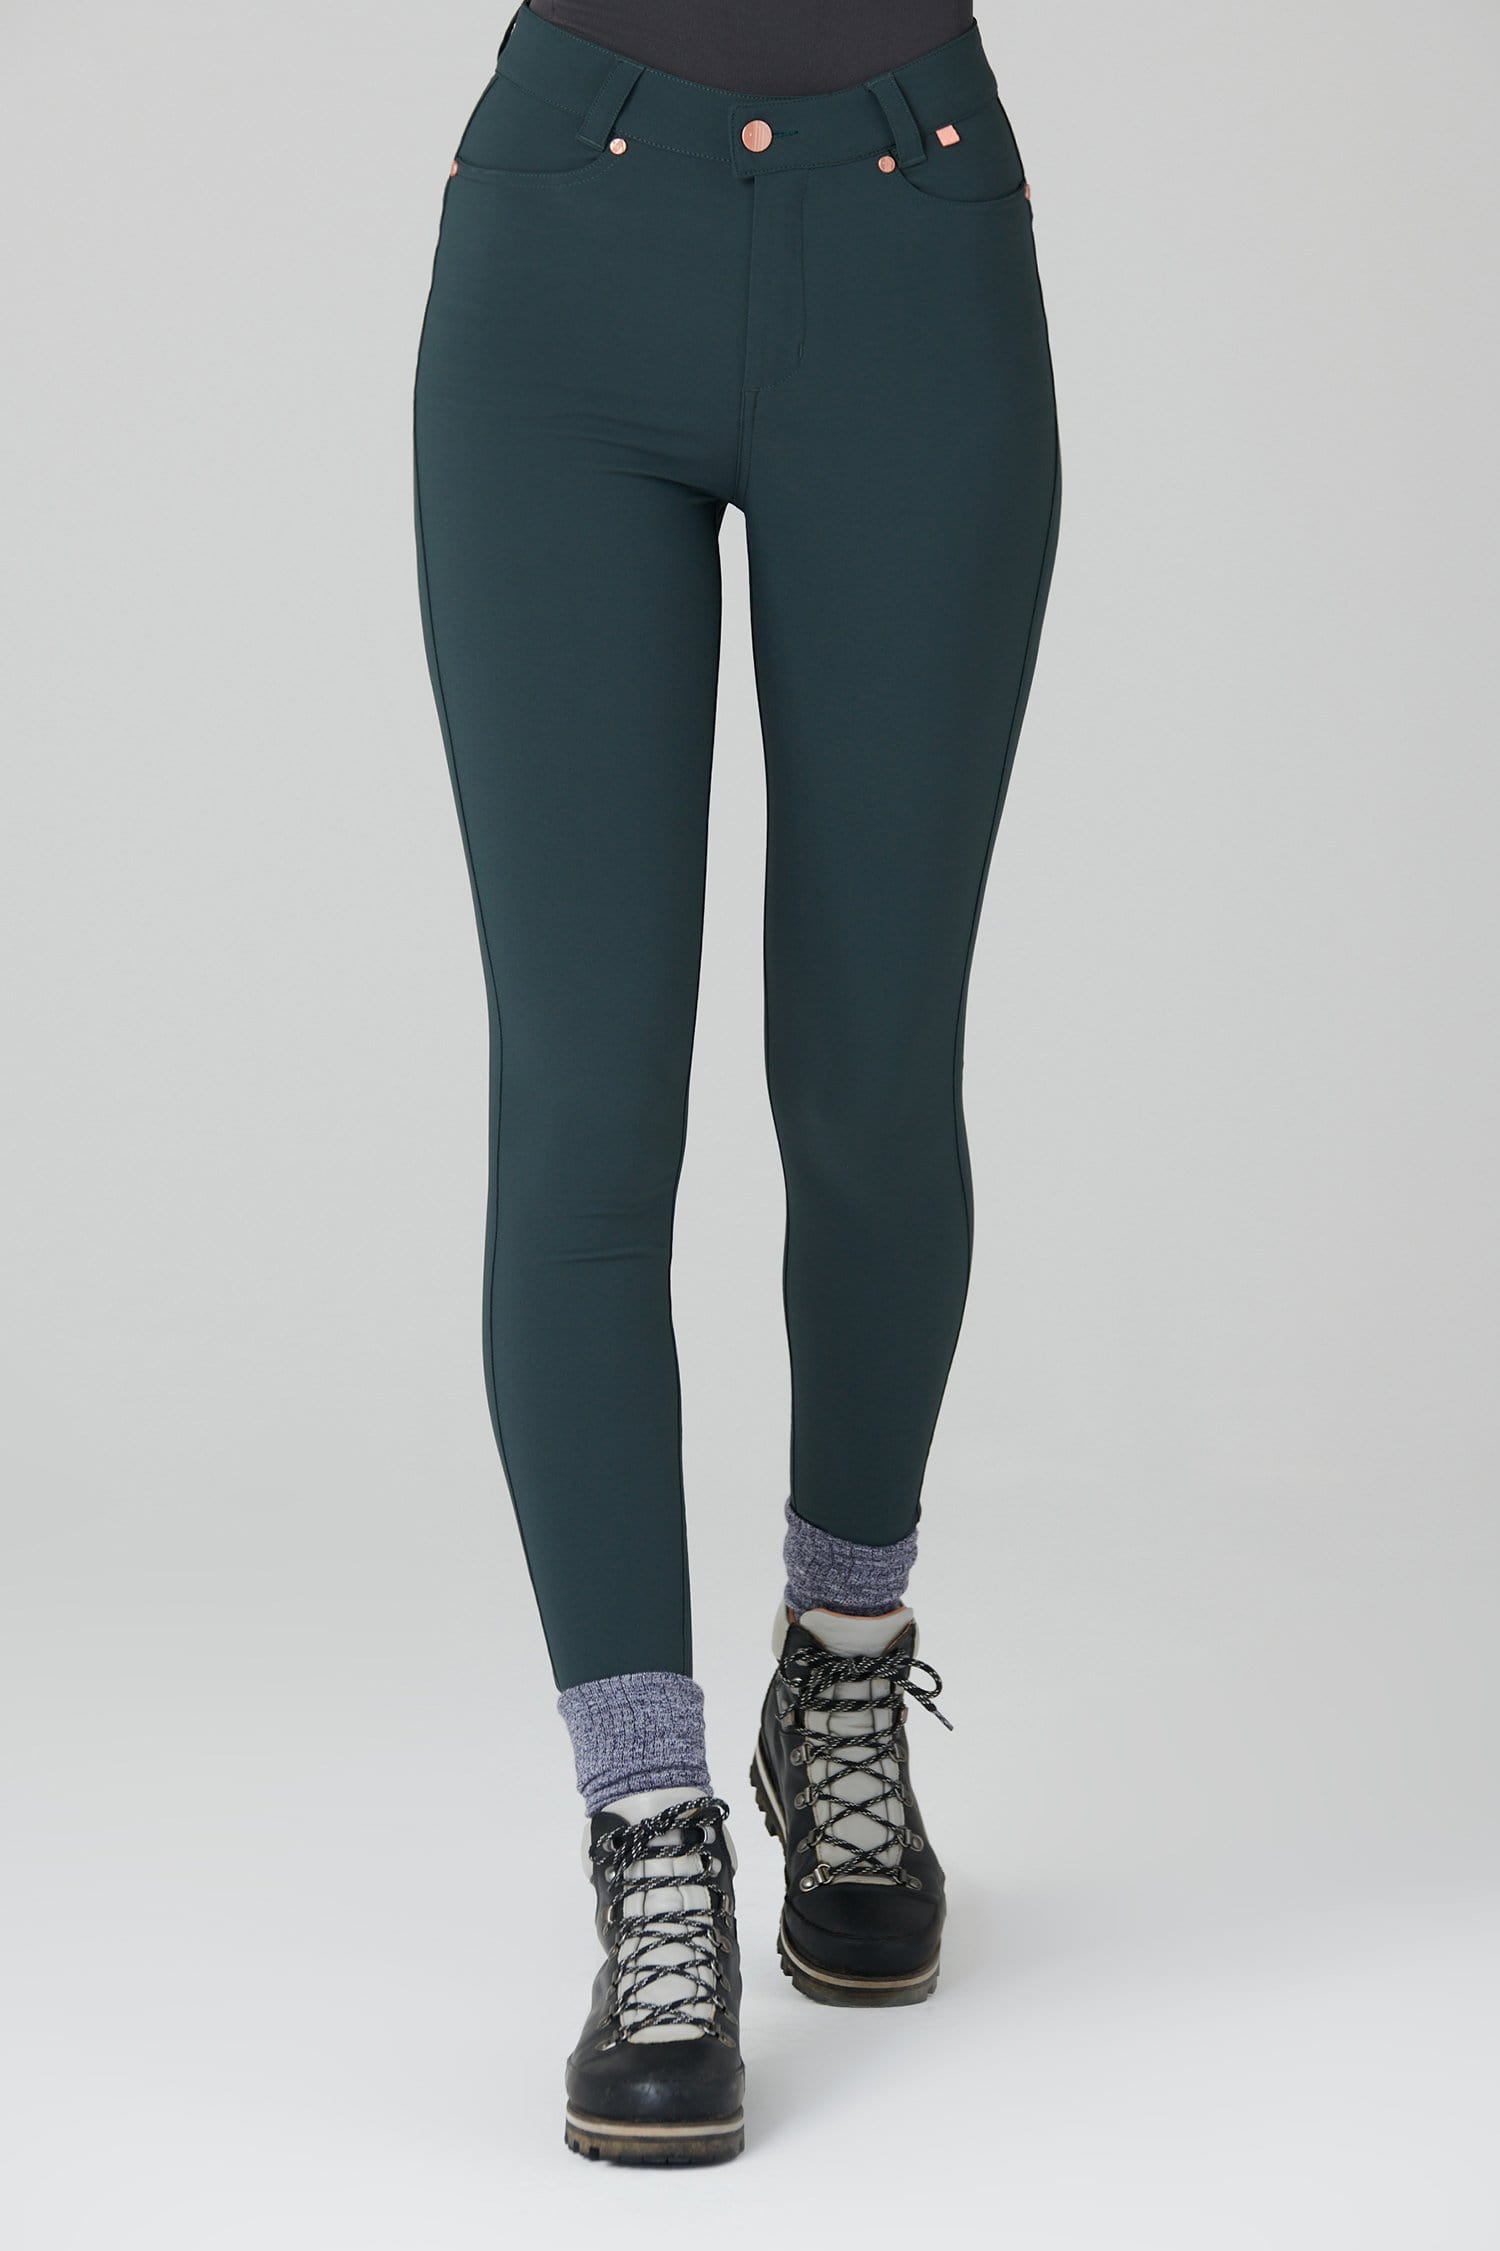 Thermal Skinny Outdoor Trousers - Forest Green - 36r / Uk18 - Womens - Acai Outdoorwear